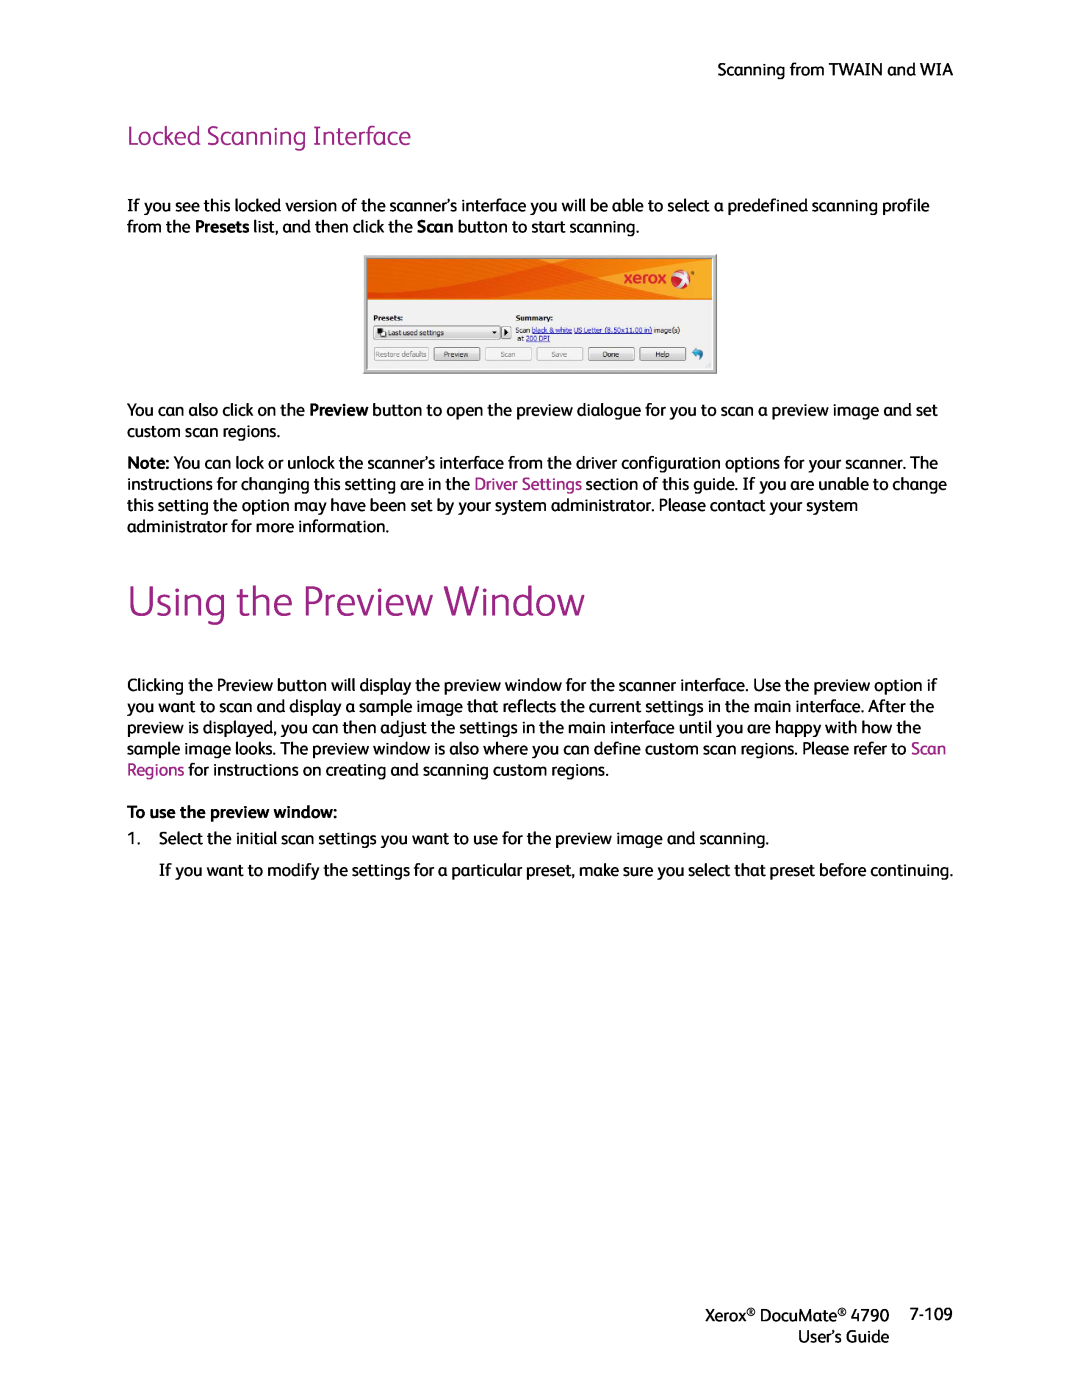 Xerox xerox documate manual Using the Preview Window, Locked Scanning Interface, To use the preview window 